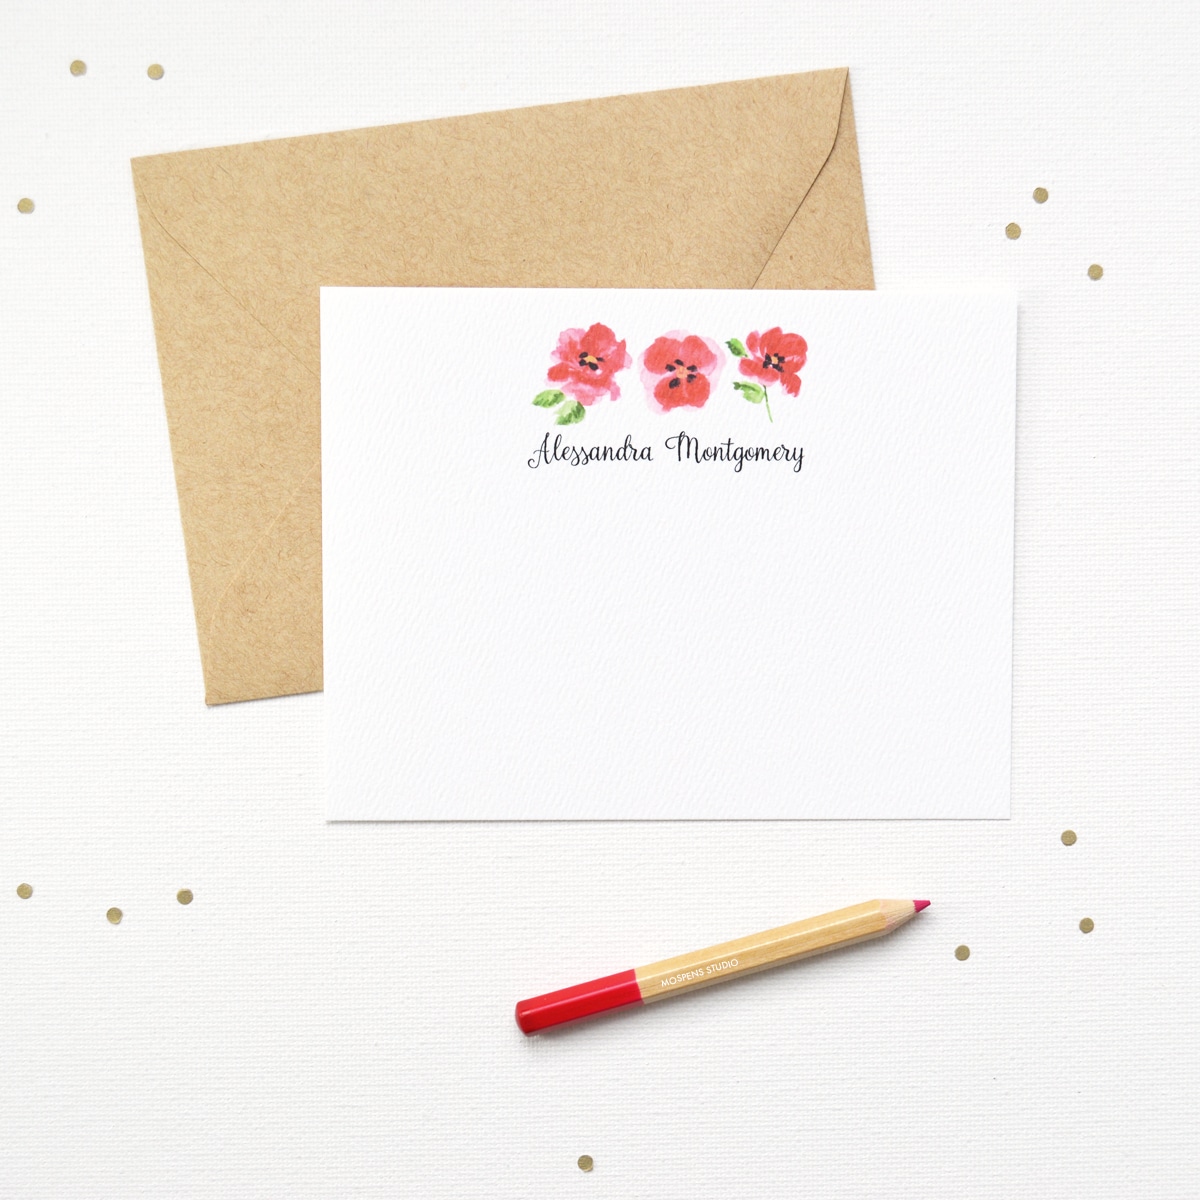 Watercolor floral red poppy flowers personalized stationery note cards set. 100% original art by artist Michelle Mospens. | Mospens Studio